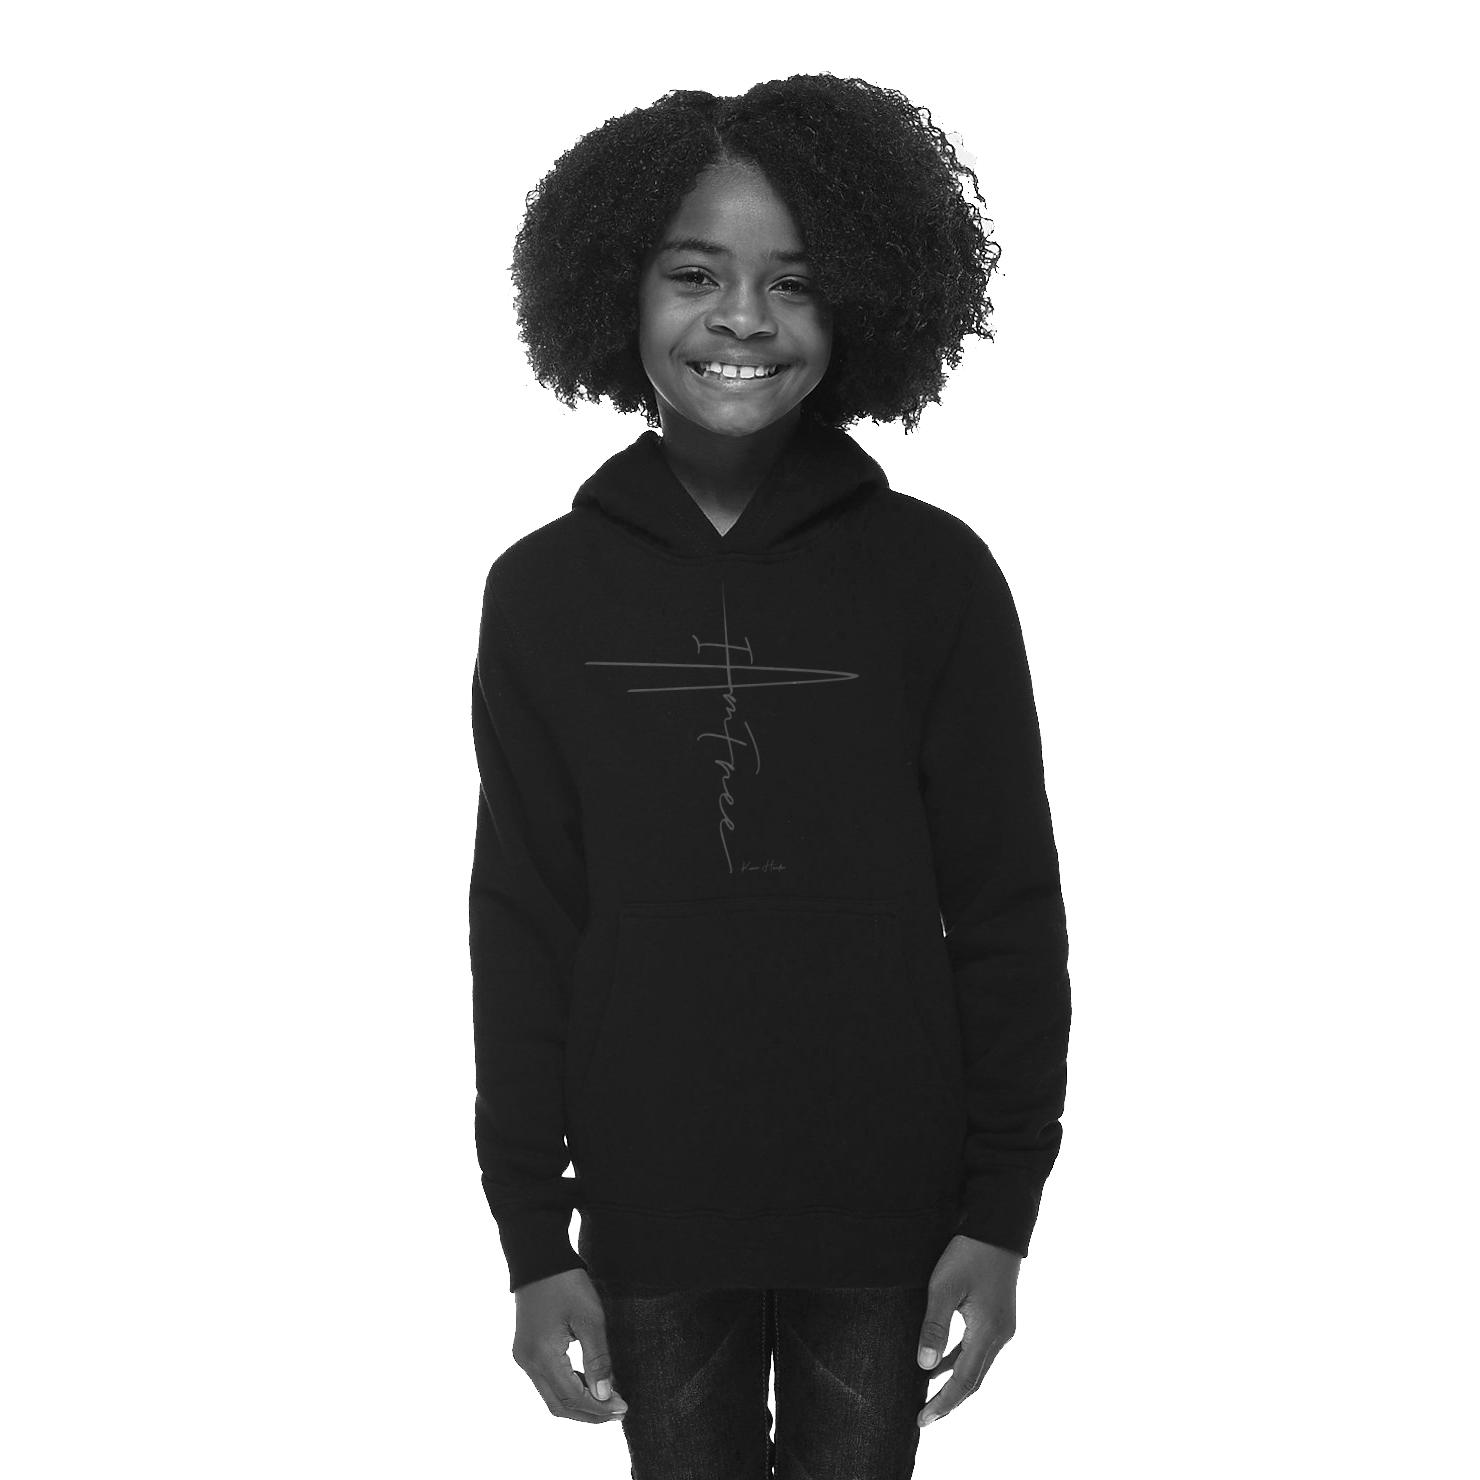 I AM FREE YOUTH HOODIE COLLECTION BY KAREN HUNTER